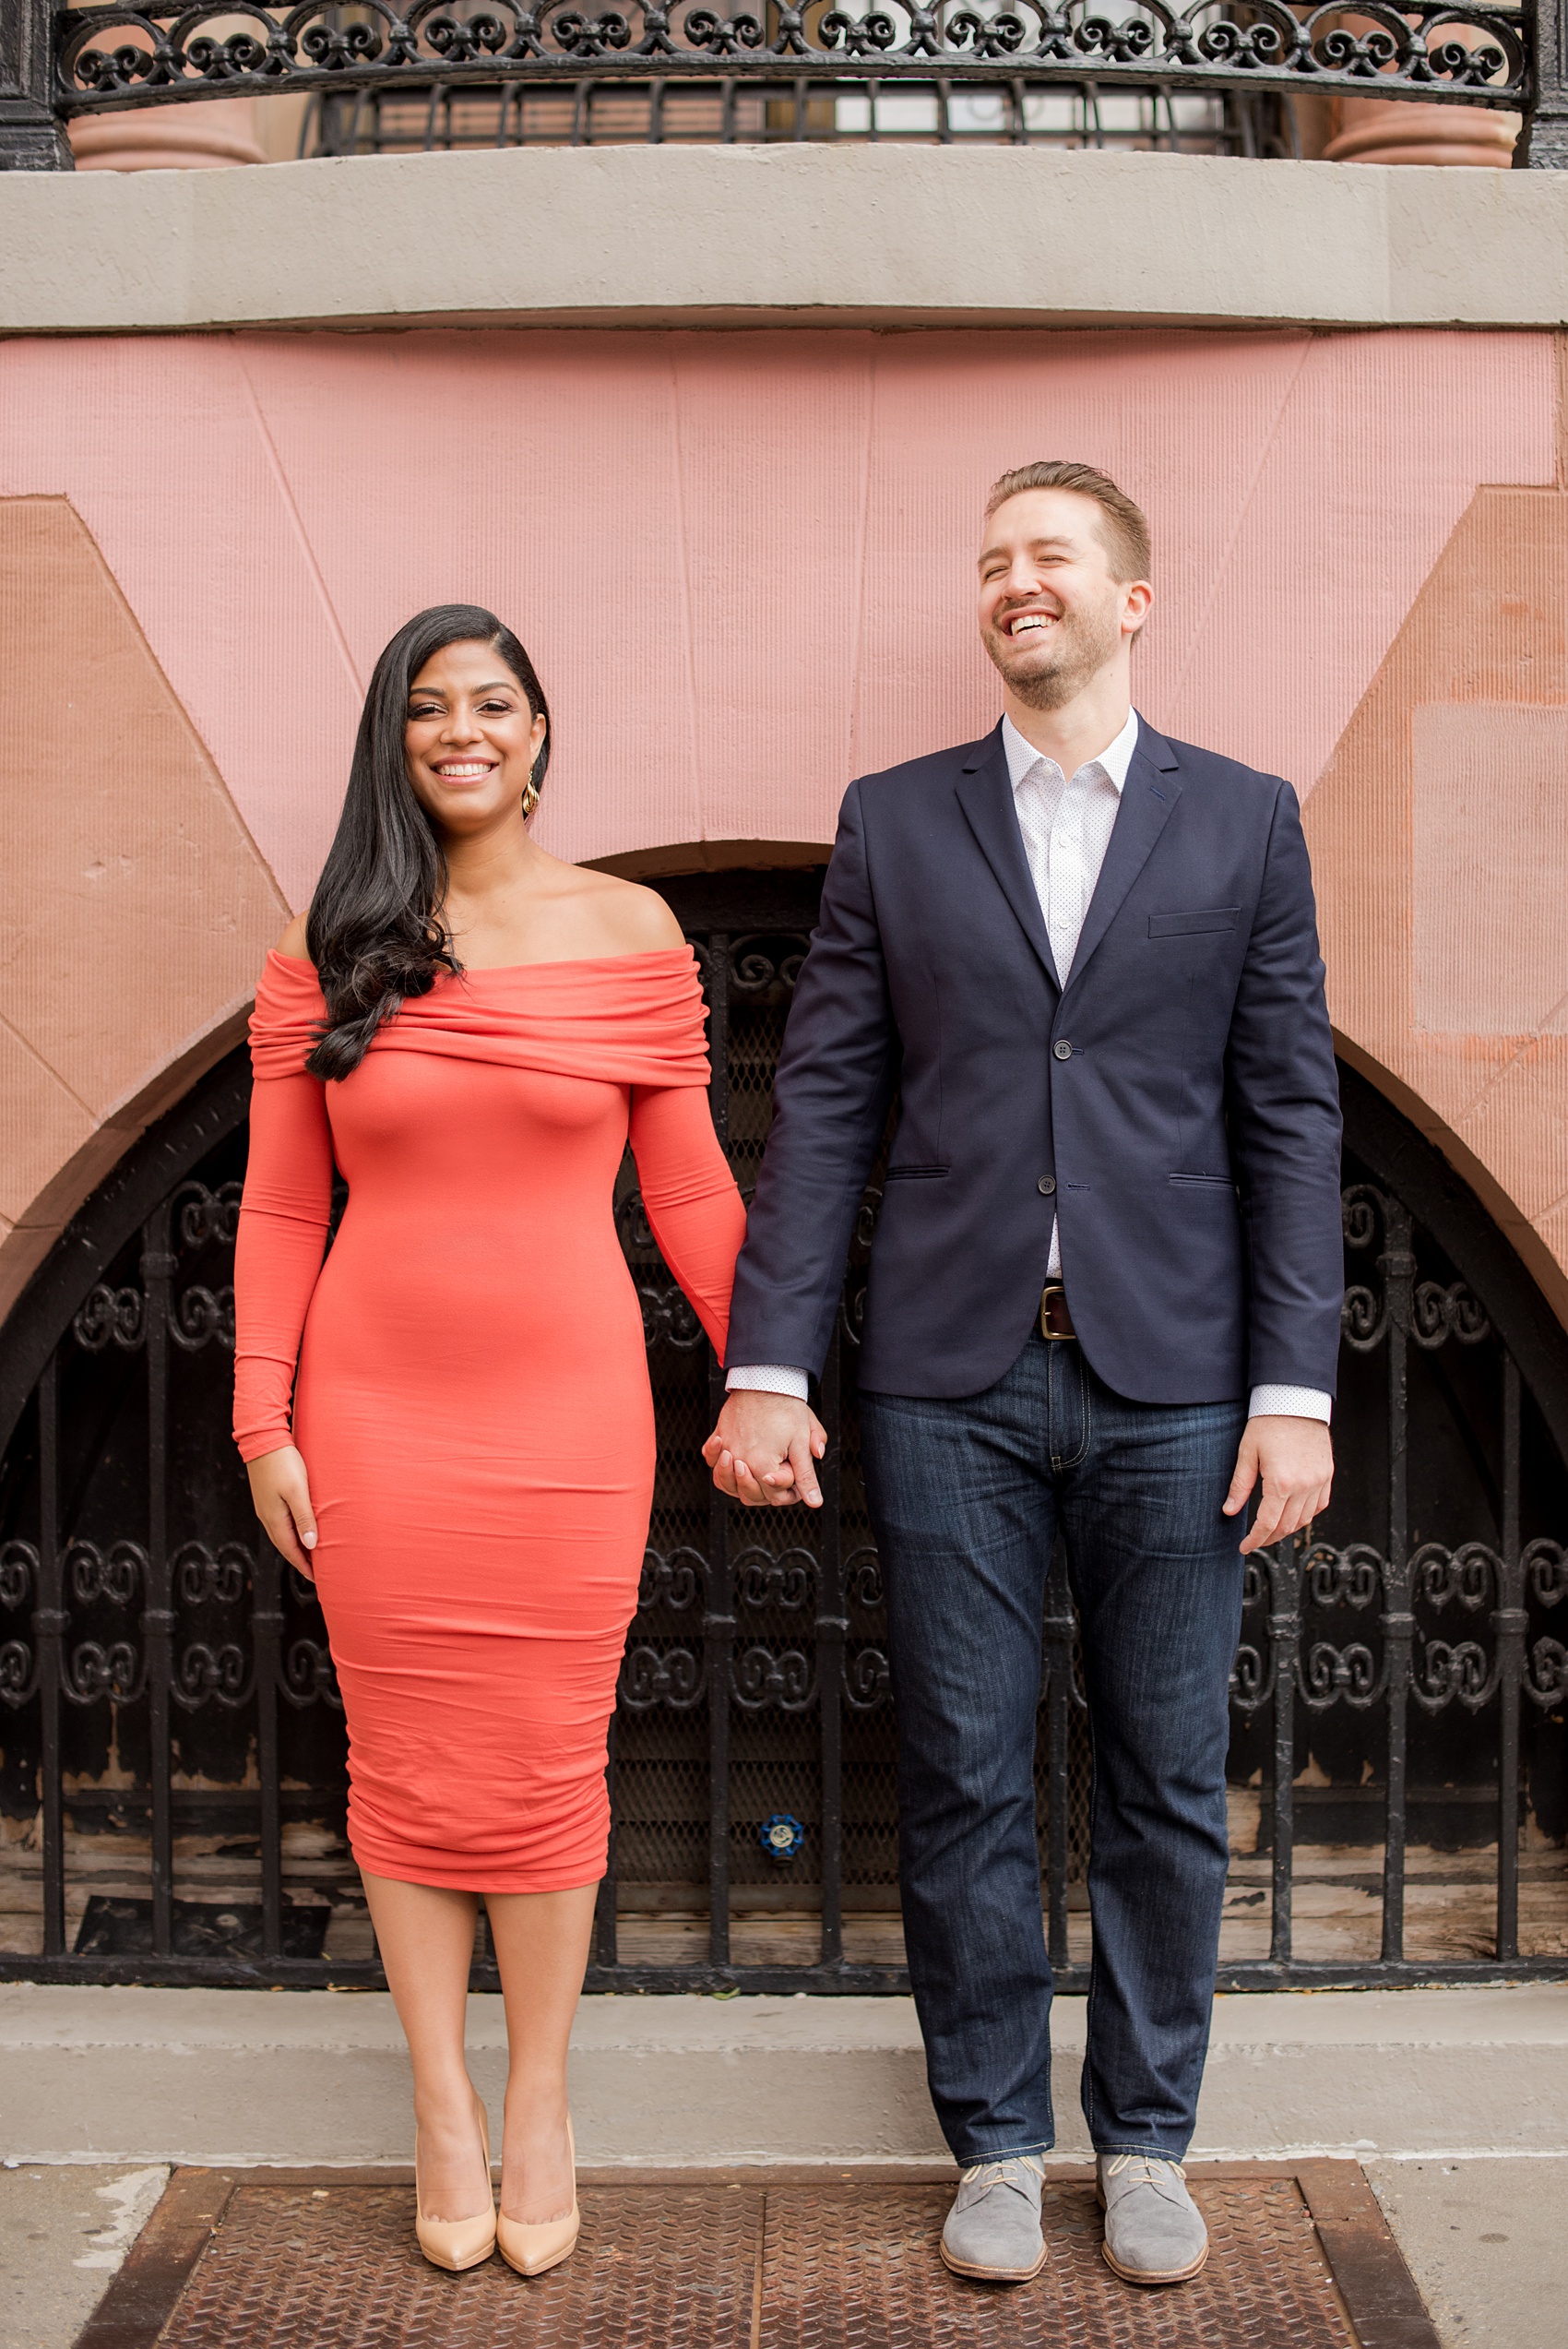 Mikkel Paige Photography pictures of an engagement session in Tribeca. A photo of the couple with great architecture.